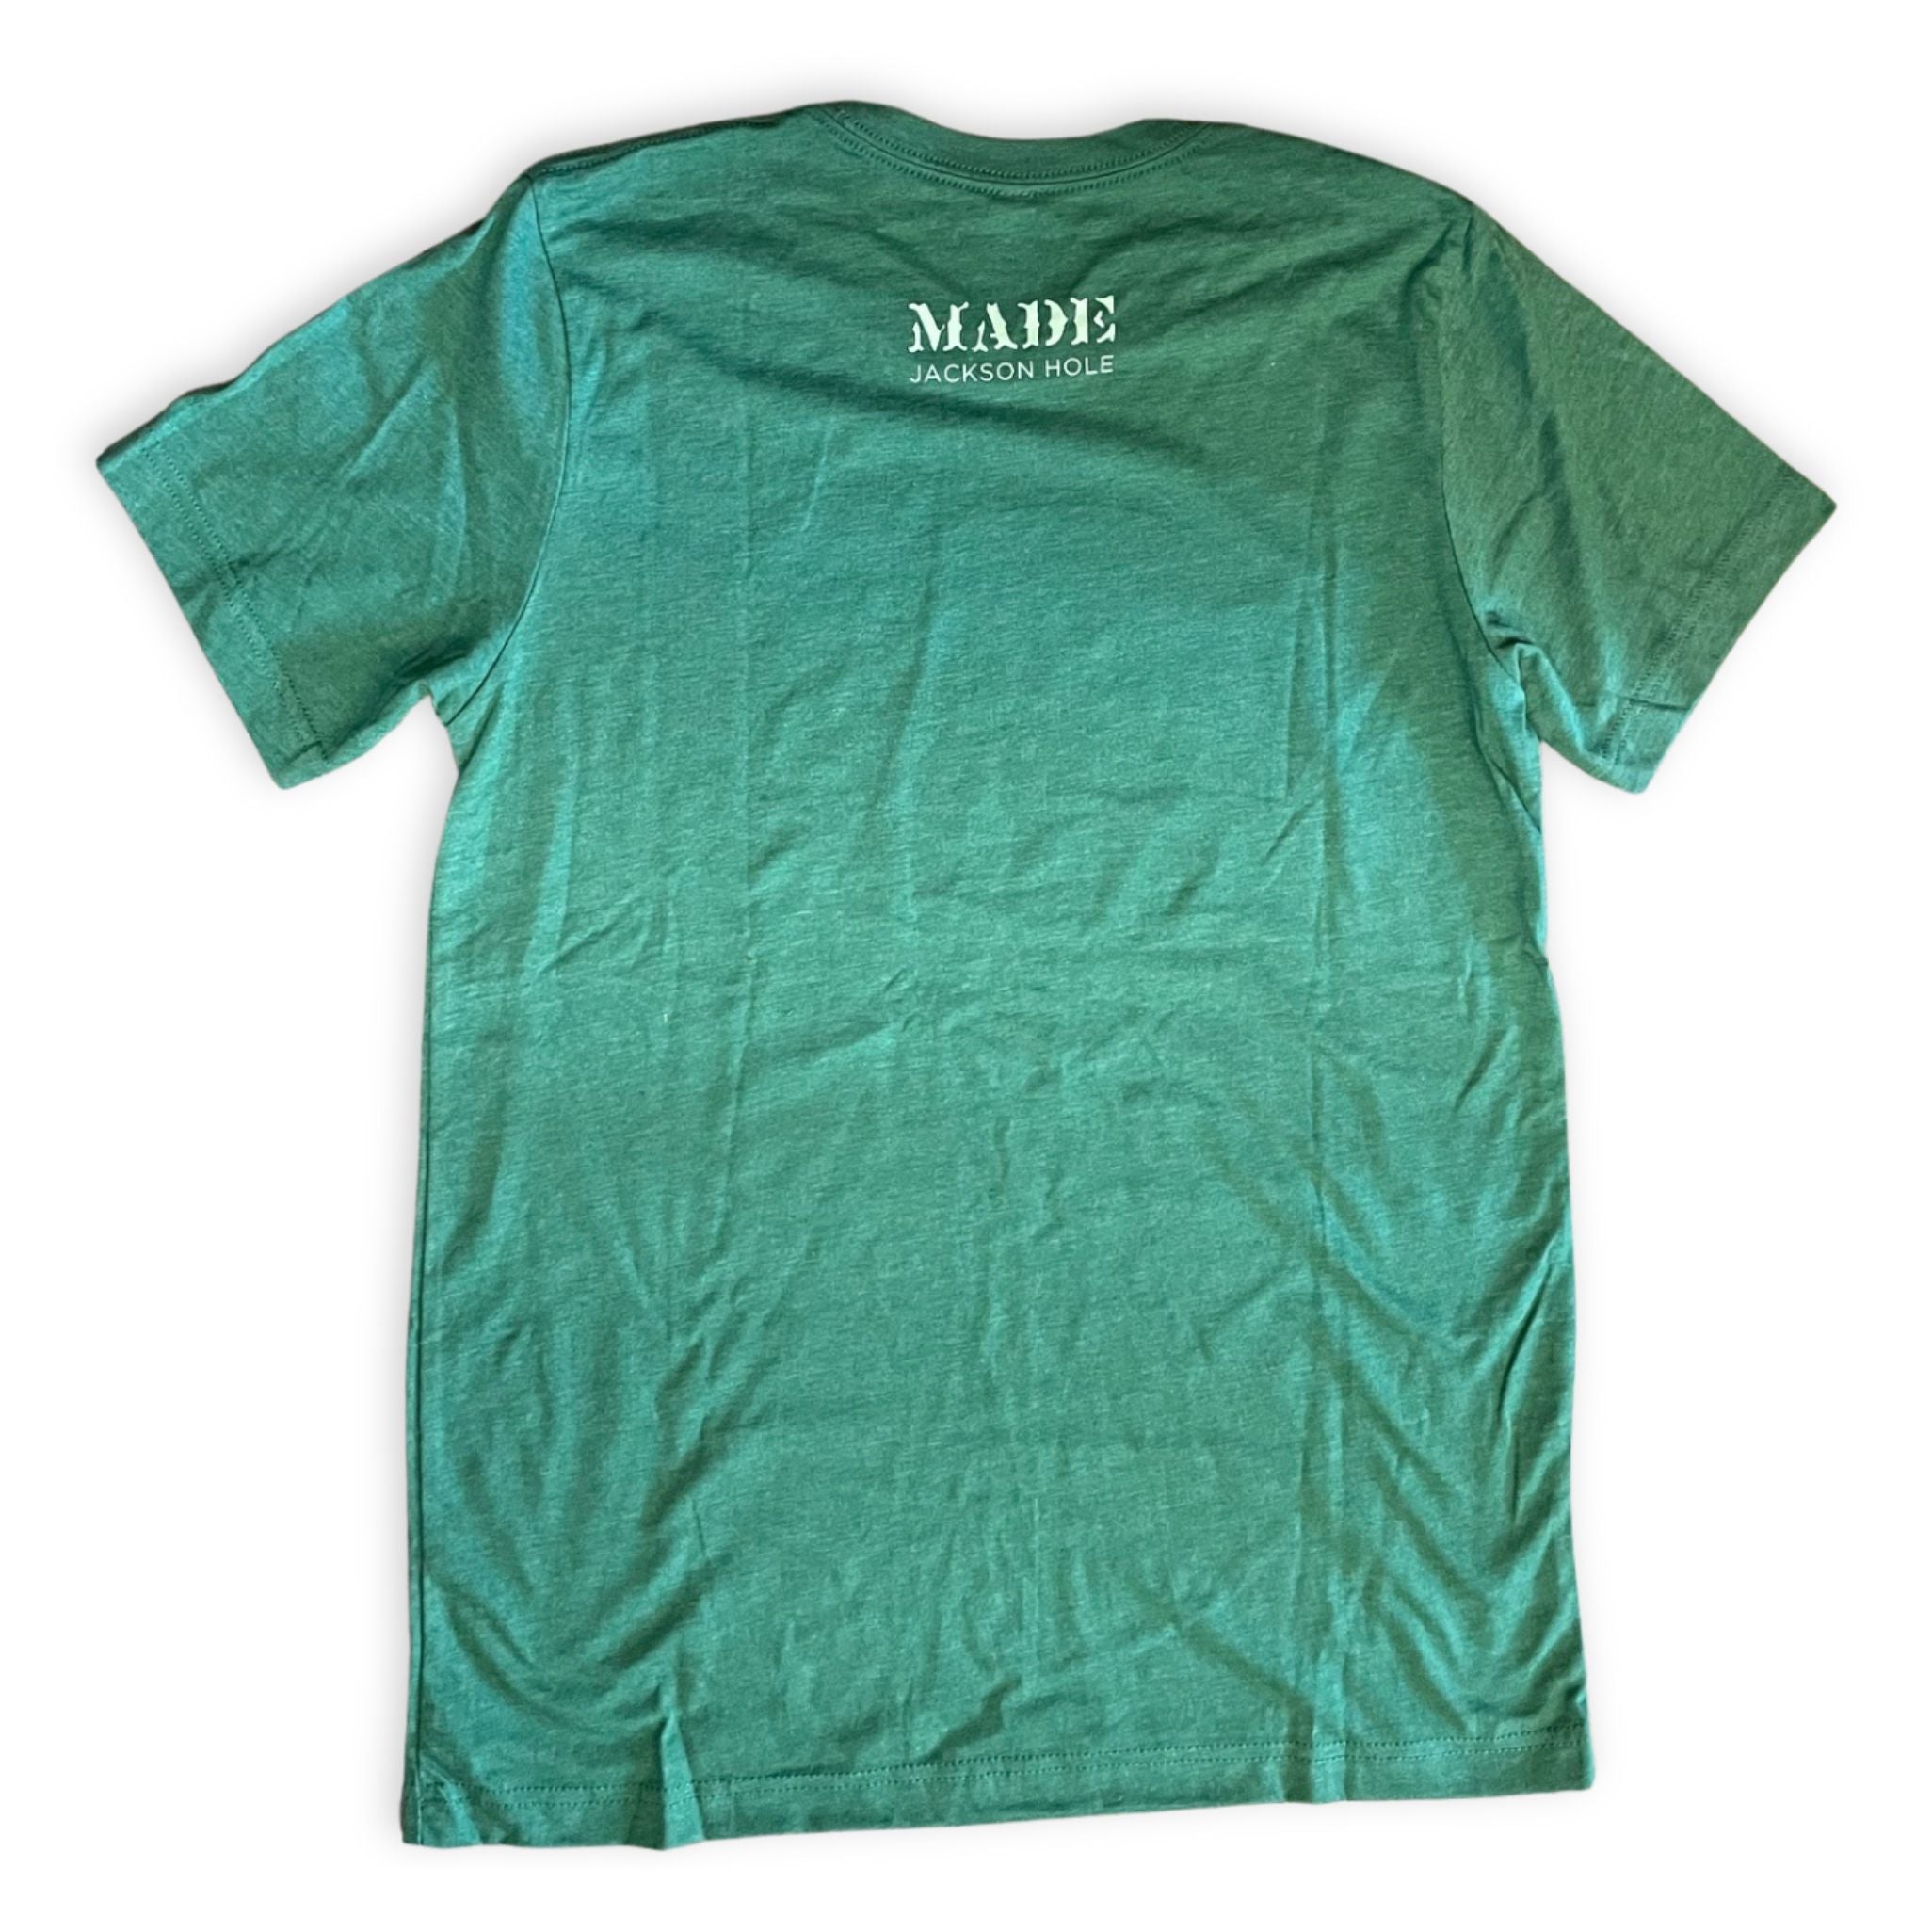 Back of Green Shirt with Shop logo on the neck